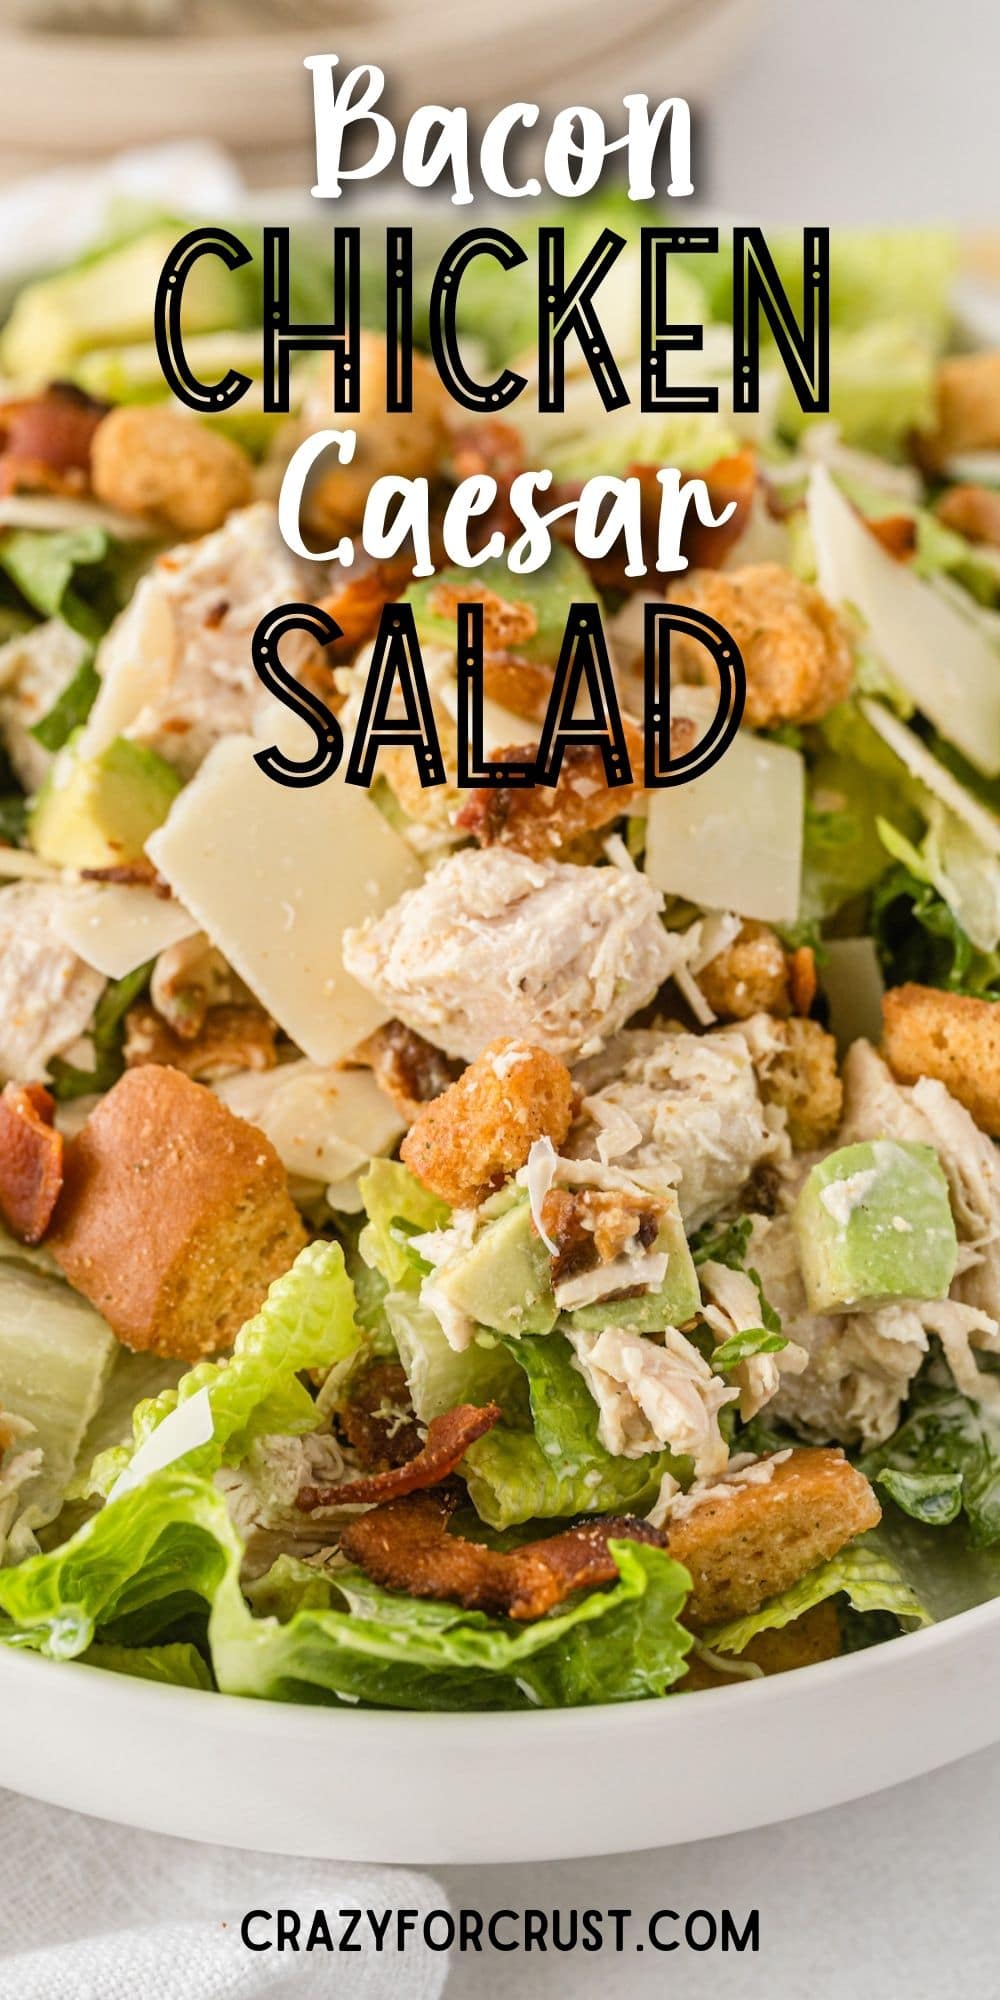 Close up shot of caesar salad with chicken and bacon in a bowl with recipe title on top of image